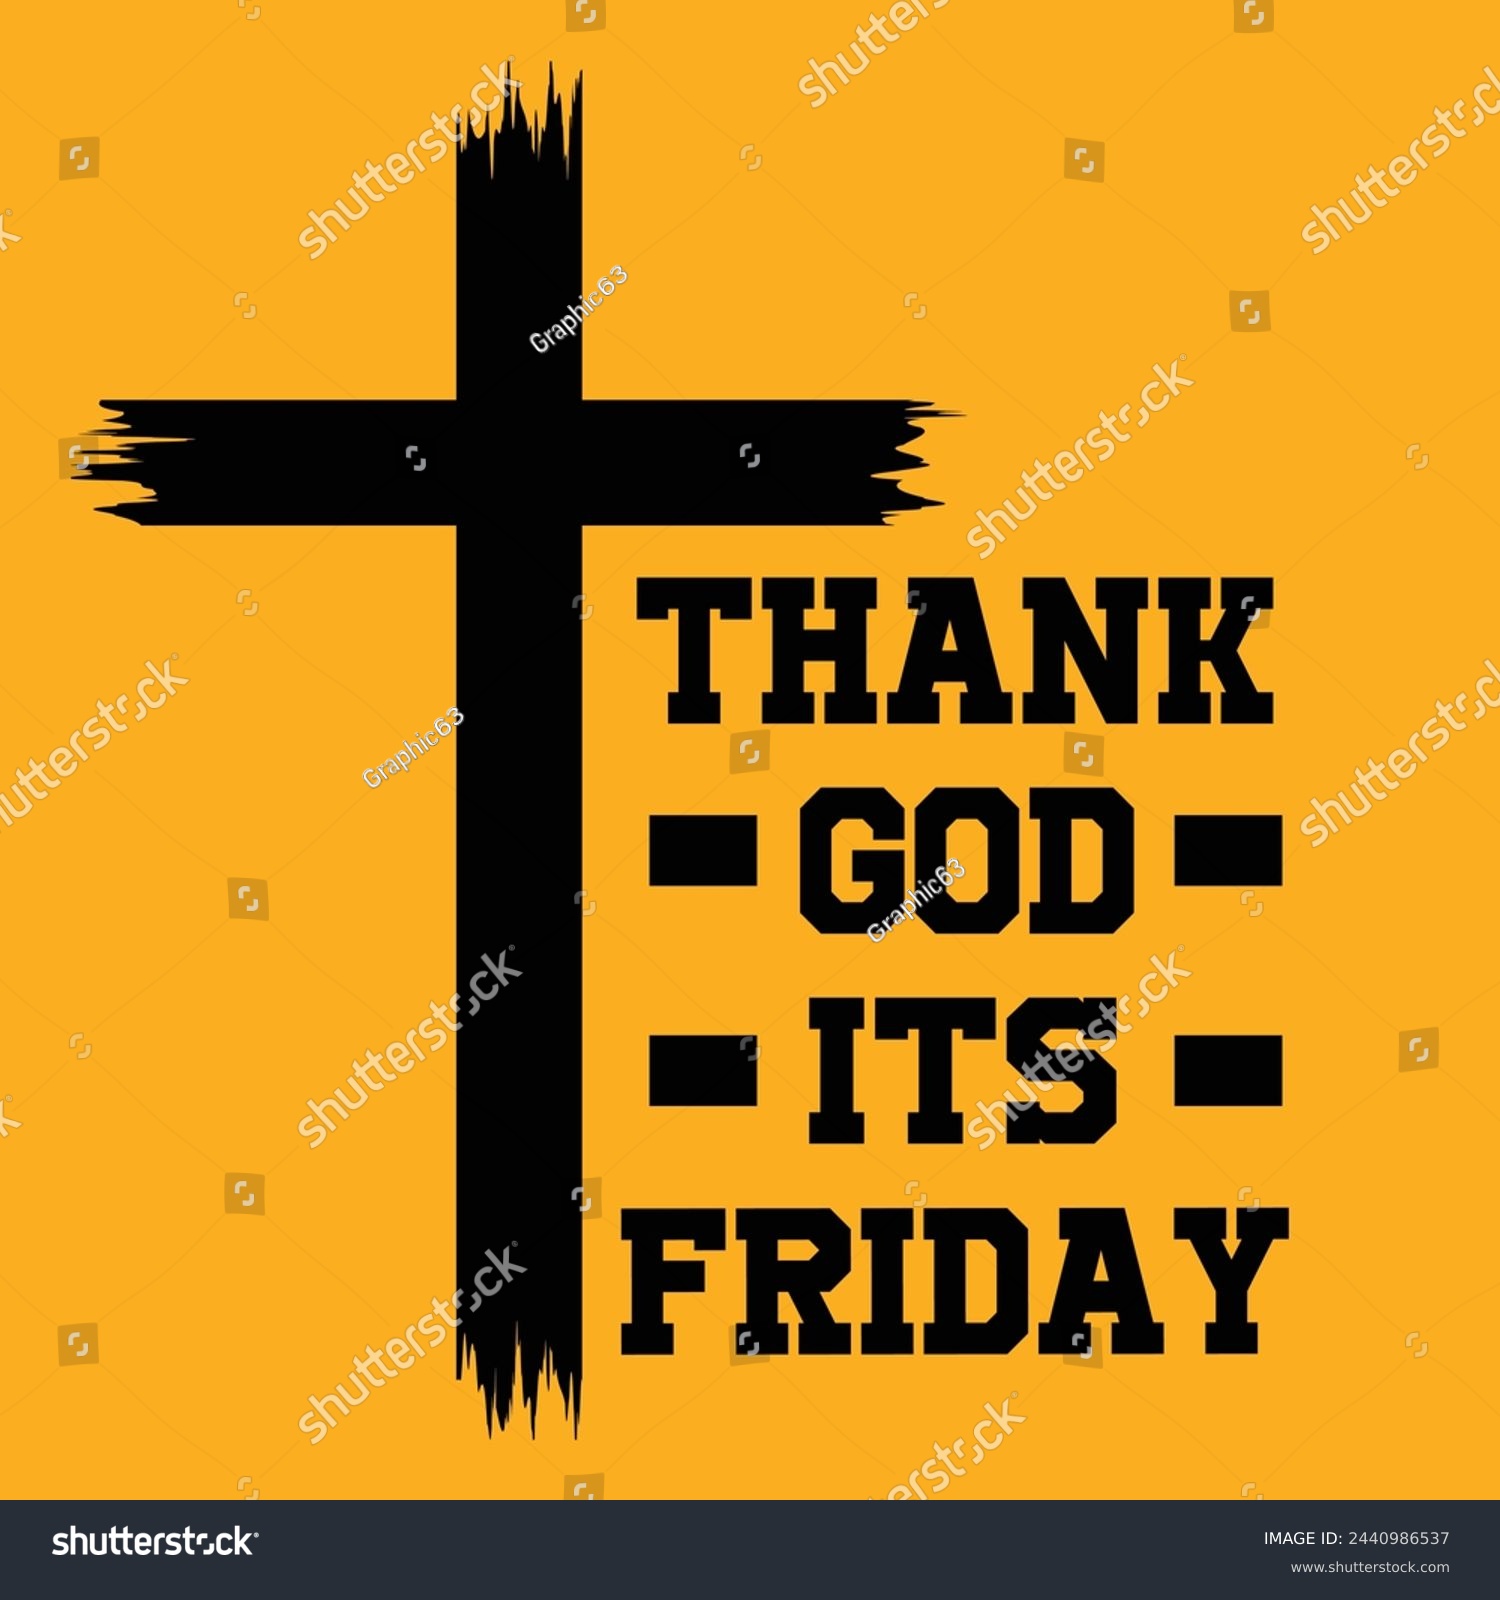 SVG of Good Friday 29 March.Thank God It's Friday.Motivational Typography Quotes Print For T Shirt, Poster, Design Vector Illustration. svg